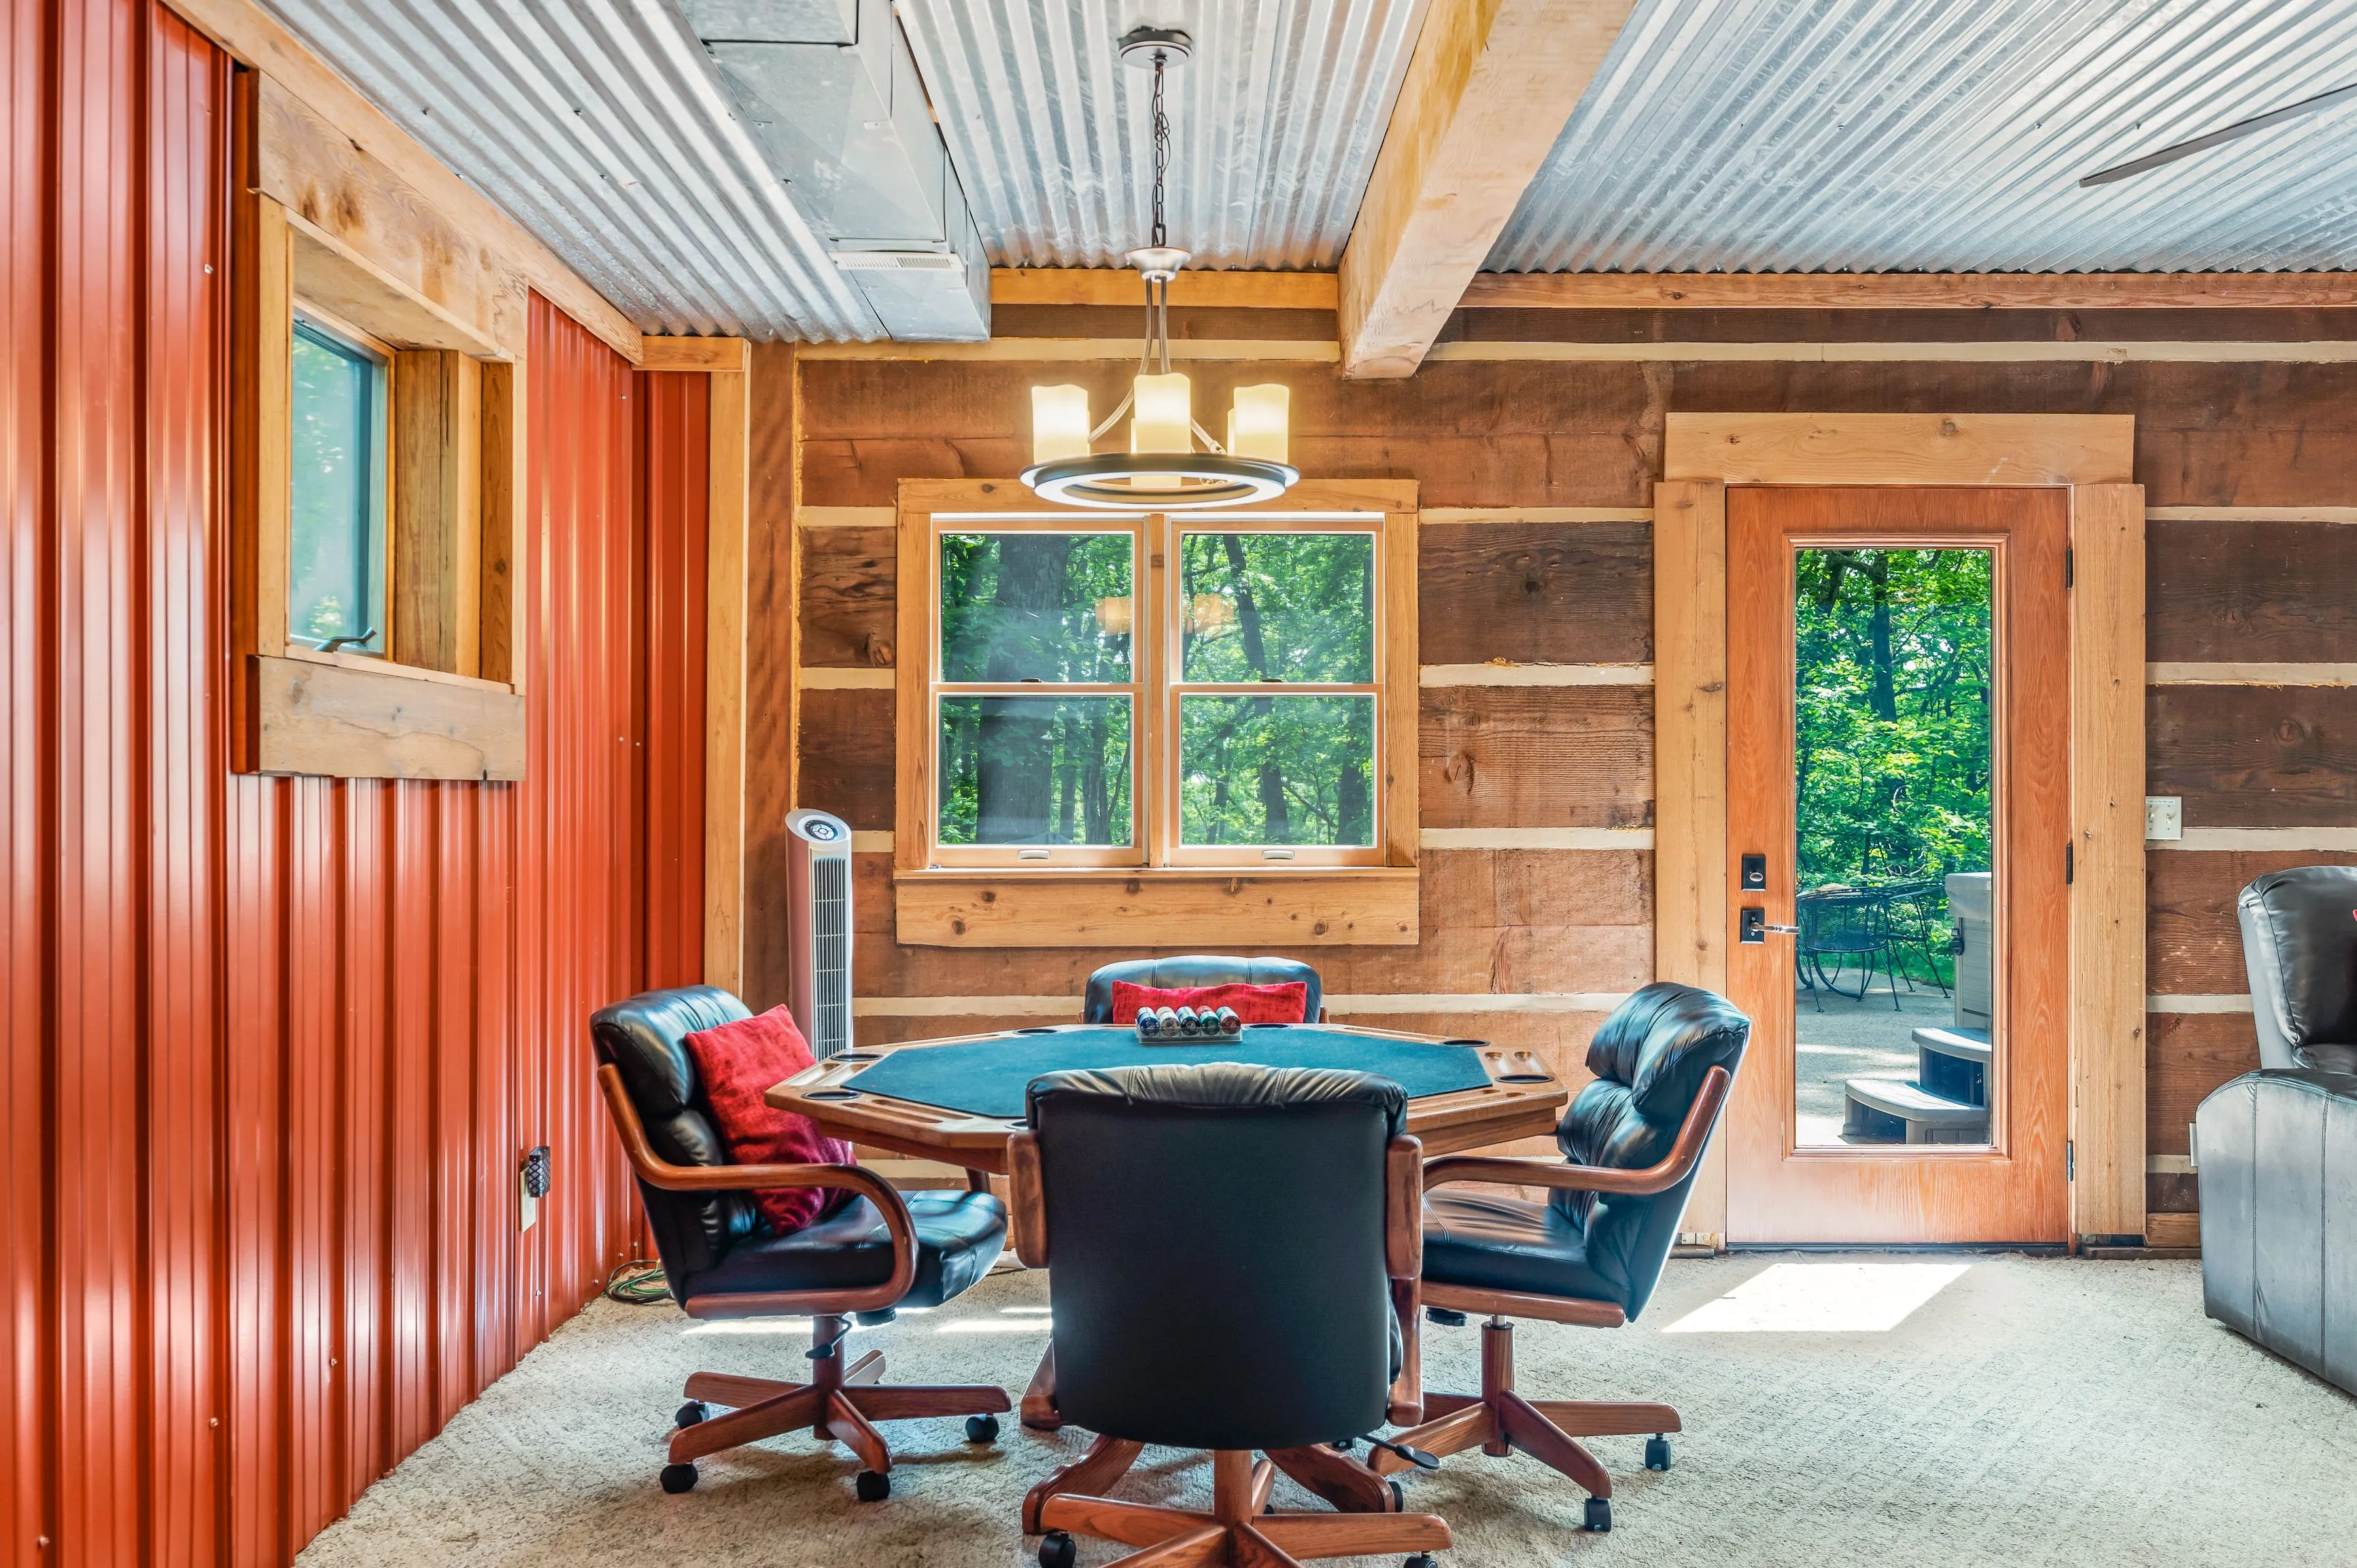 Rustic home office with corrugated metal ceiling, red accent wall, log cabin walls, a hexagonal wooden desk with leather chairs, and windows looking out to greenery.